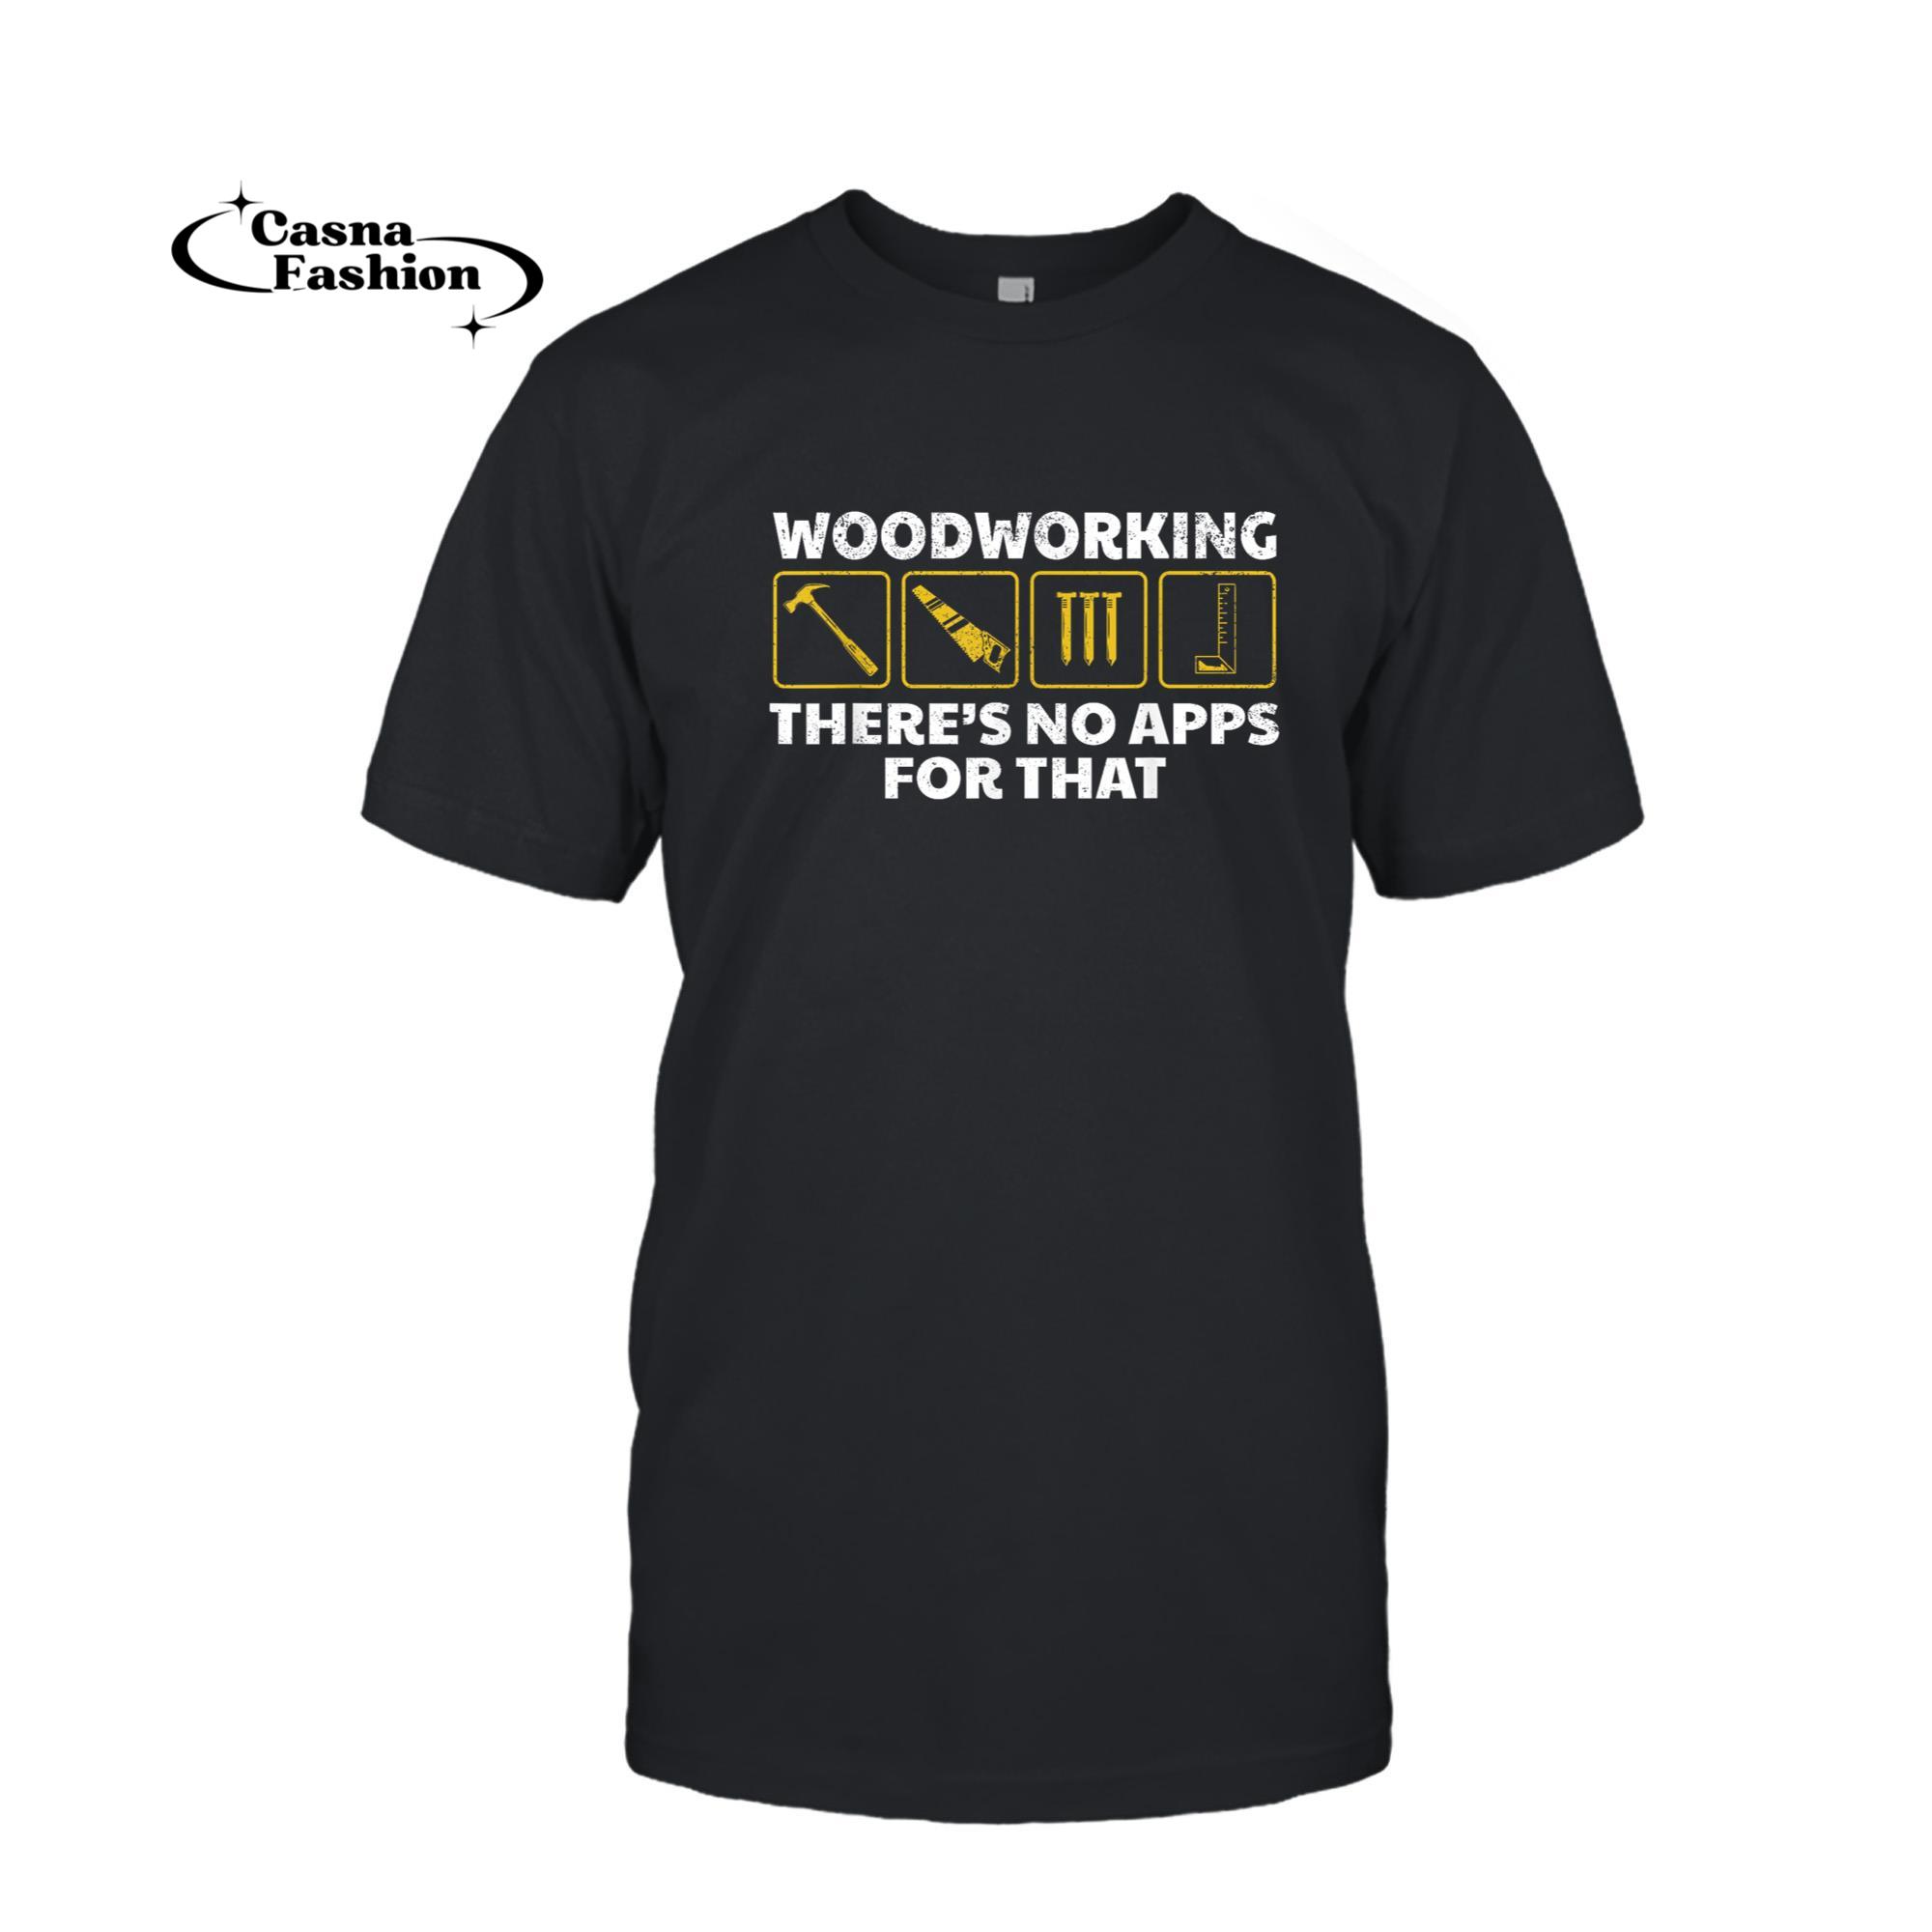 casnafashion_T-shirt_Woodworking There's No Apps For That - Funny Carpenter T-Shirt_T-shirt_Black